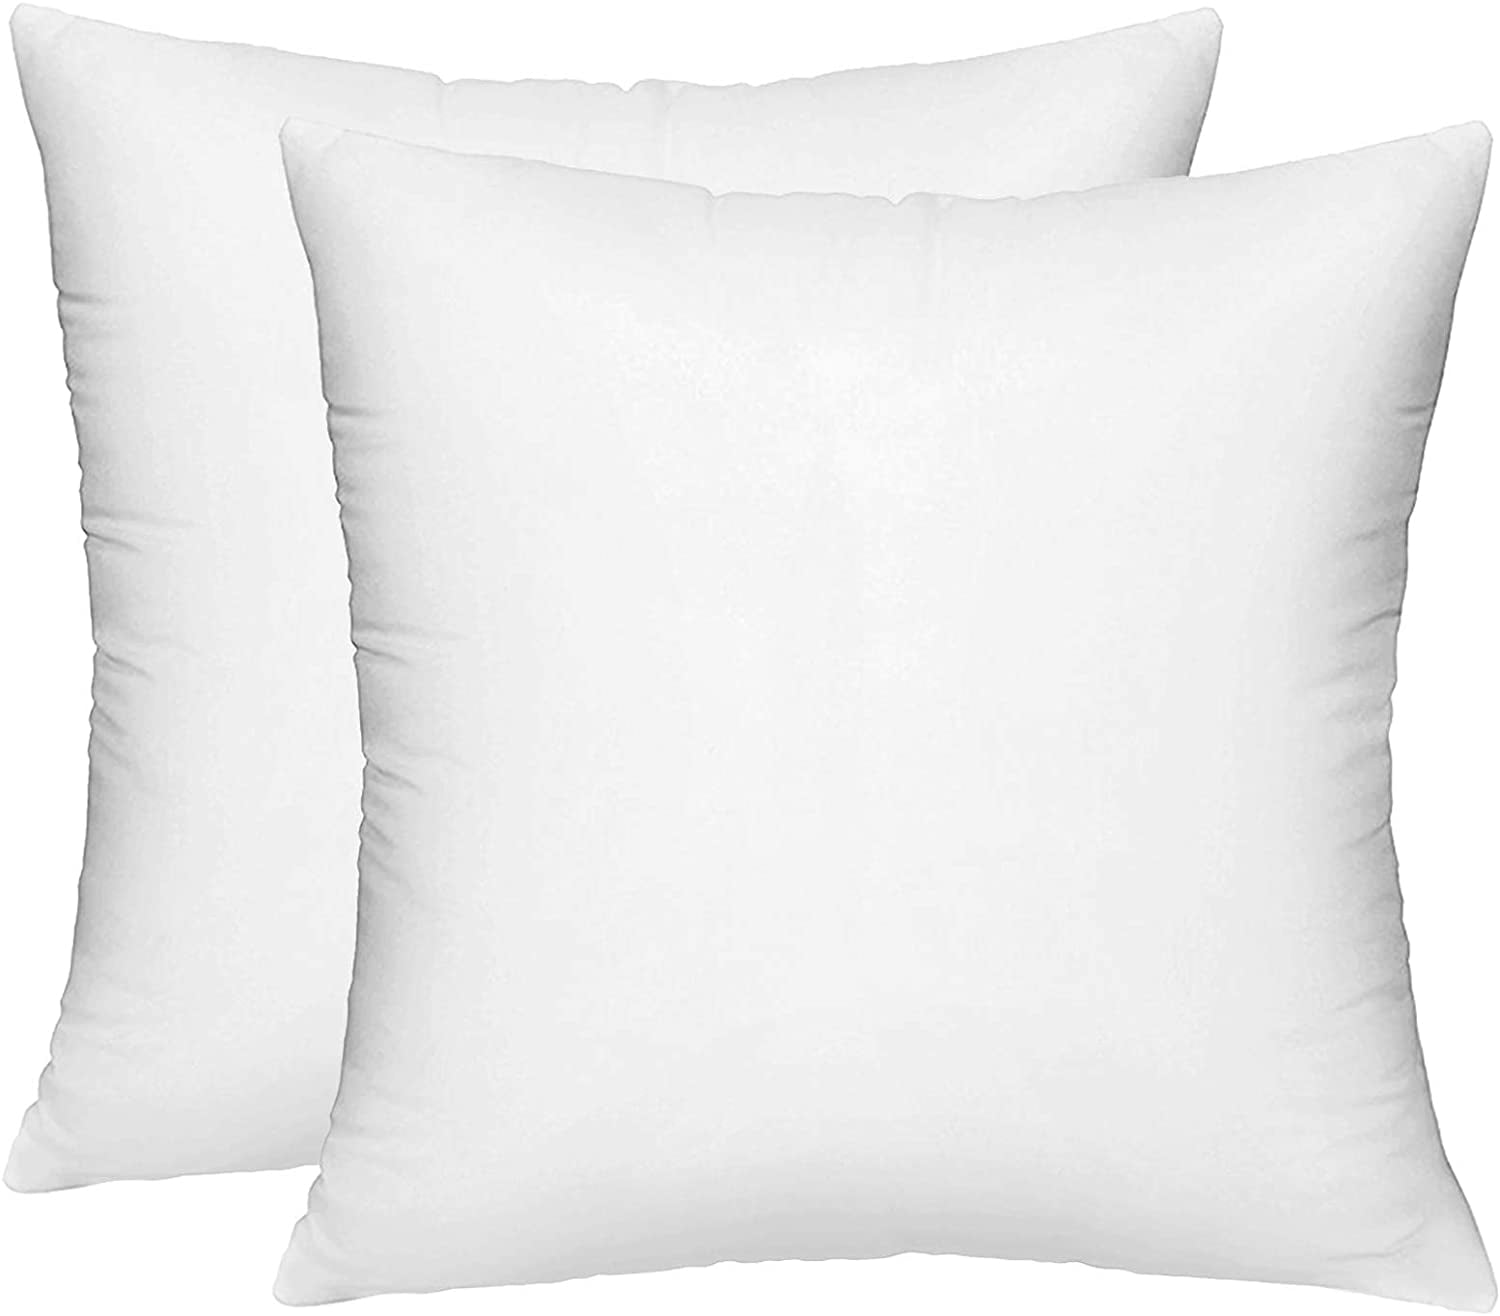 Square Indoor Decorative Pillows Harapu 4 Pack Throw Pillows Insert Bed and Couch Pillows,18 x 18 Inches（White） Stuffer Pillow Inserts